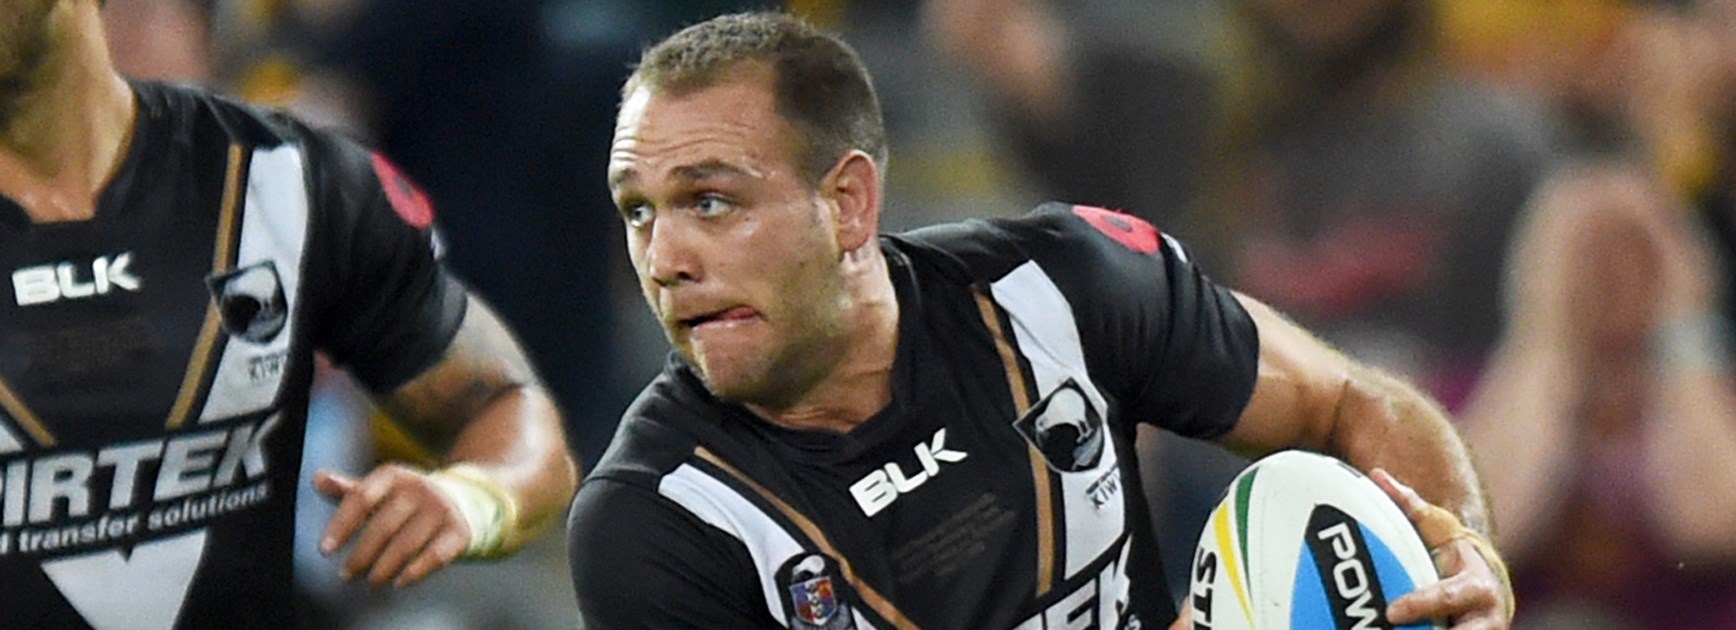 Kiwis winger Jason Nightingale says New Zealand has already shown they can win without some of their best players.